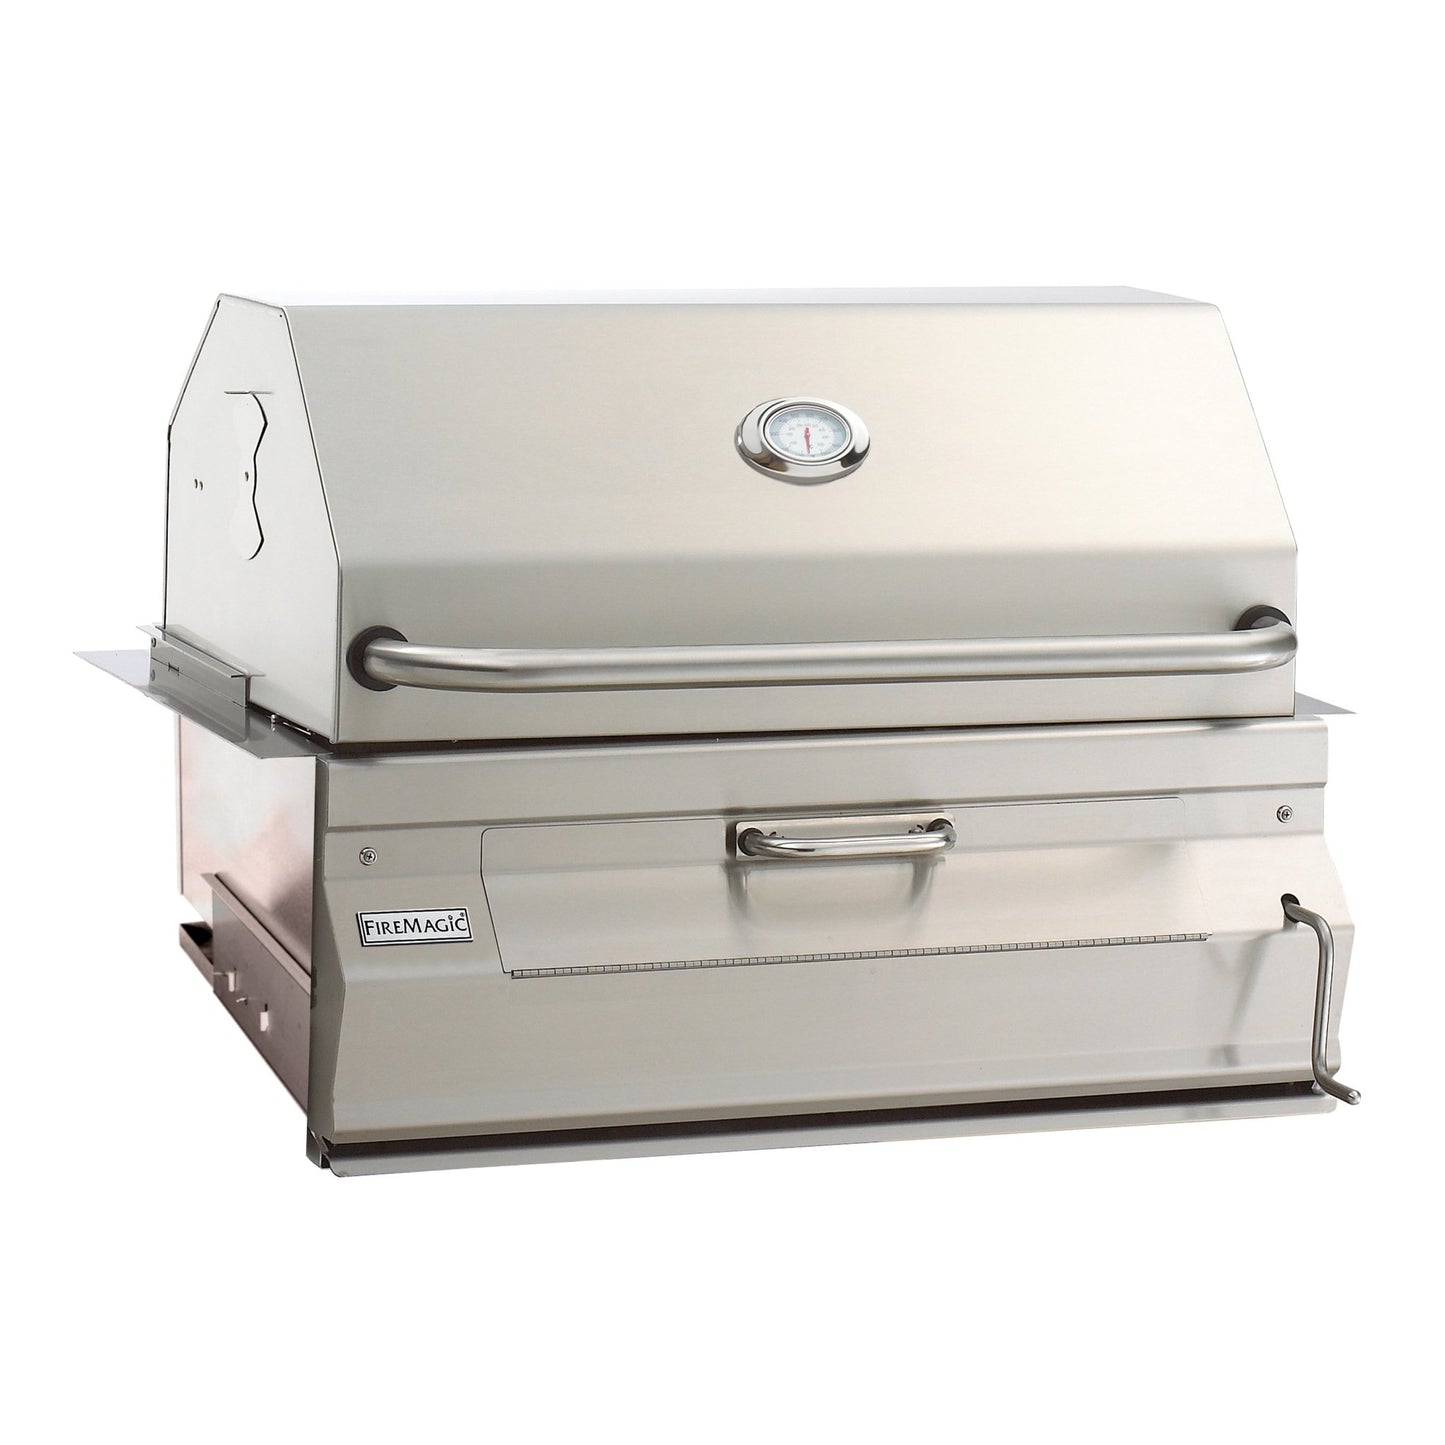 Fire Magic 24-Inch Built-In Legacy Charcoal Grill with Analog Thermometer - grillsNmore.com